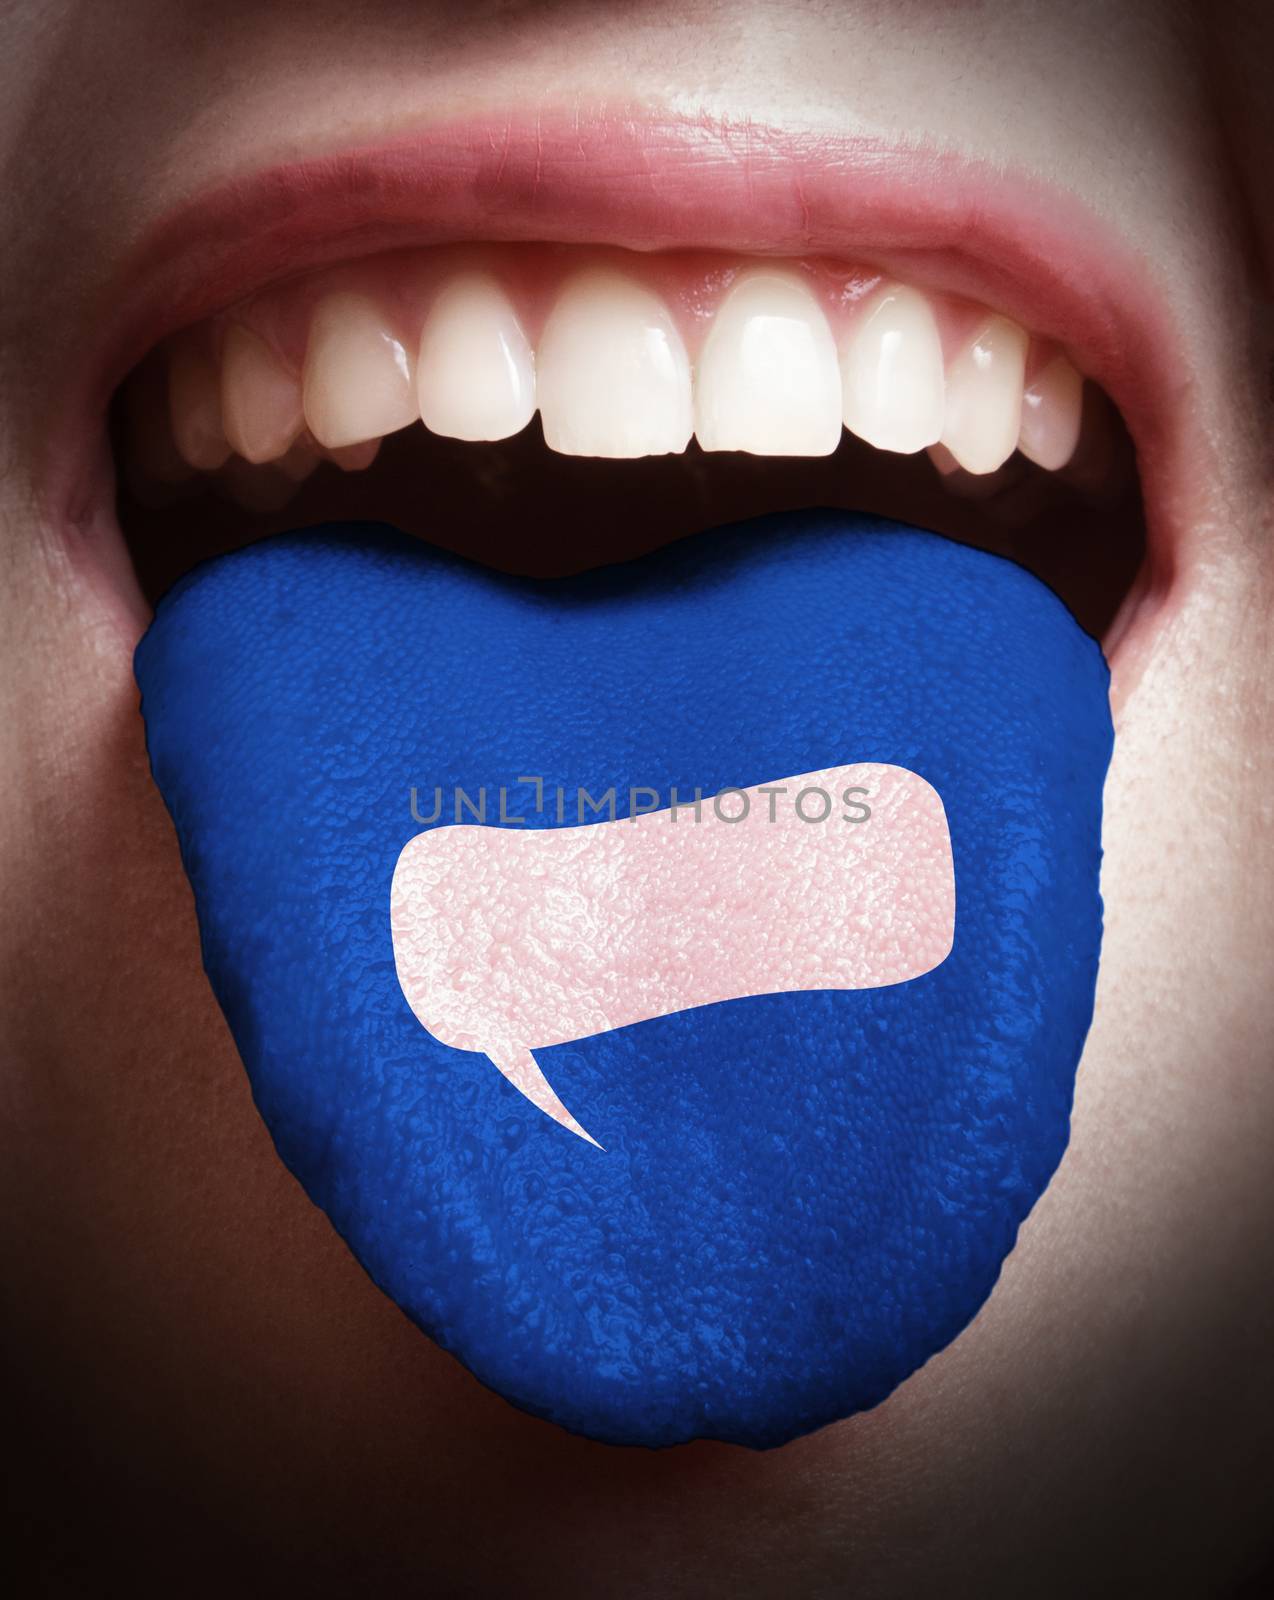 woman with open mouth spreading tongue colored in speech bubble icon as concept